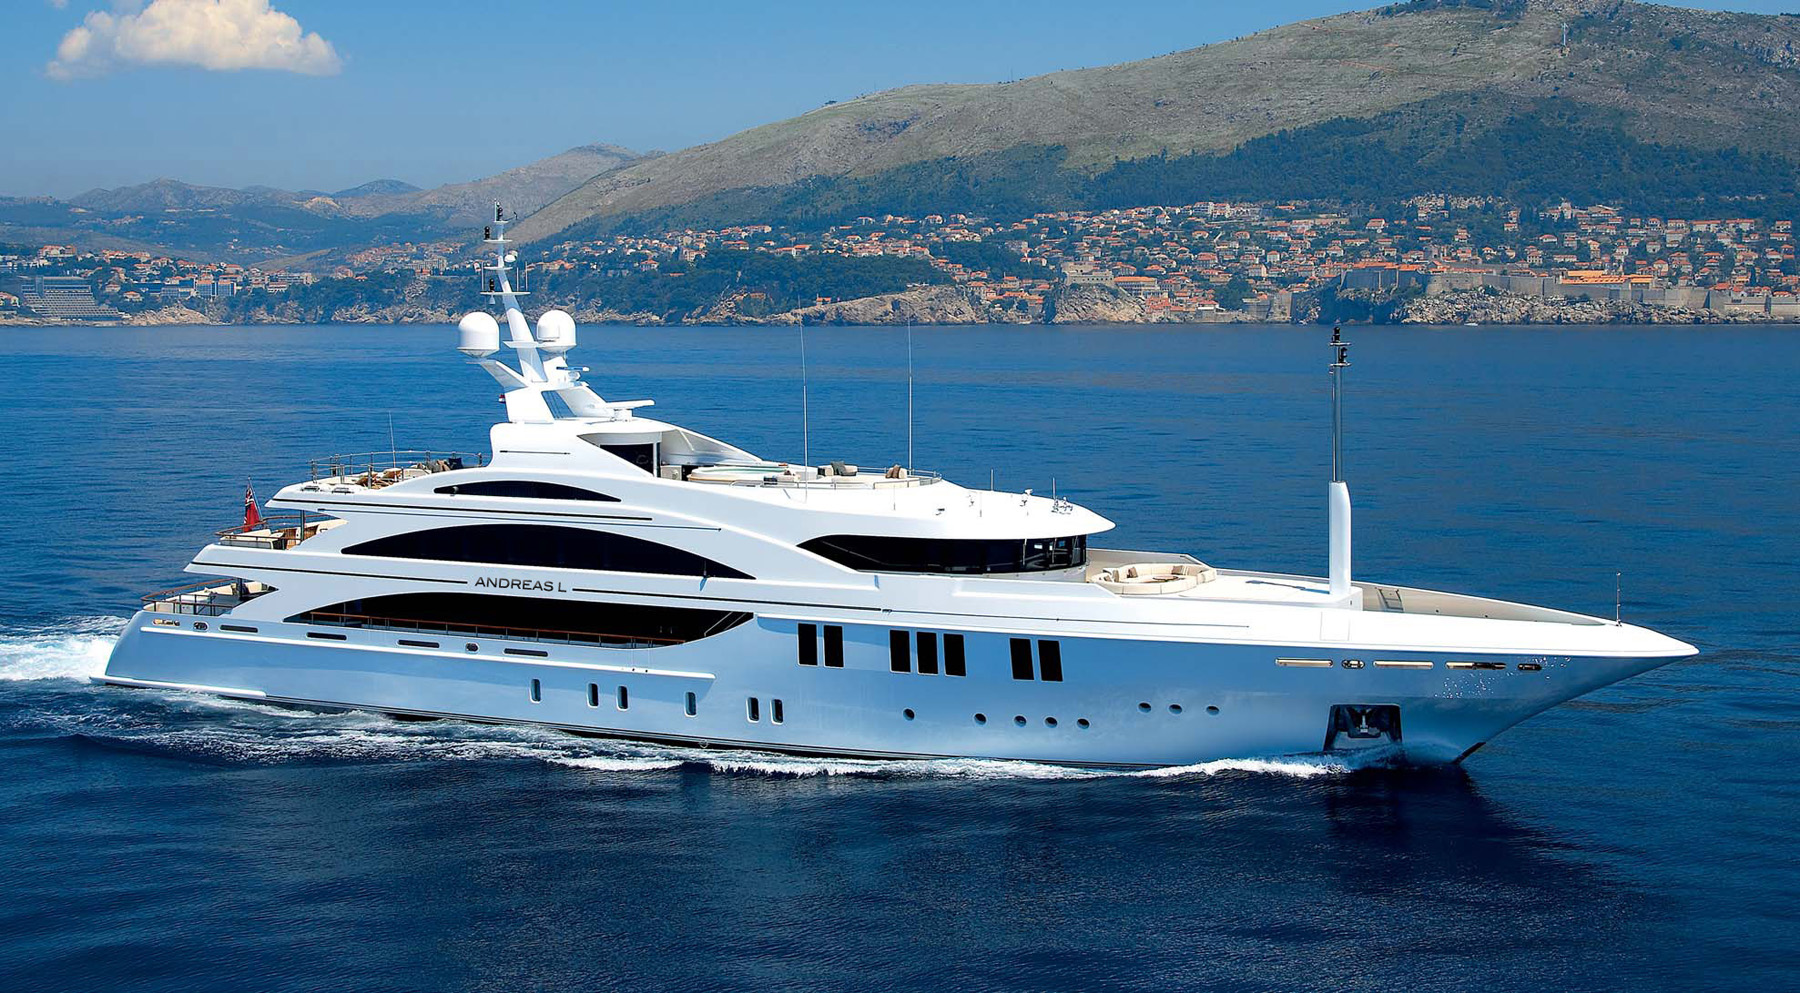 ANDREAS L charter specs and number of guests